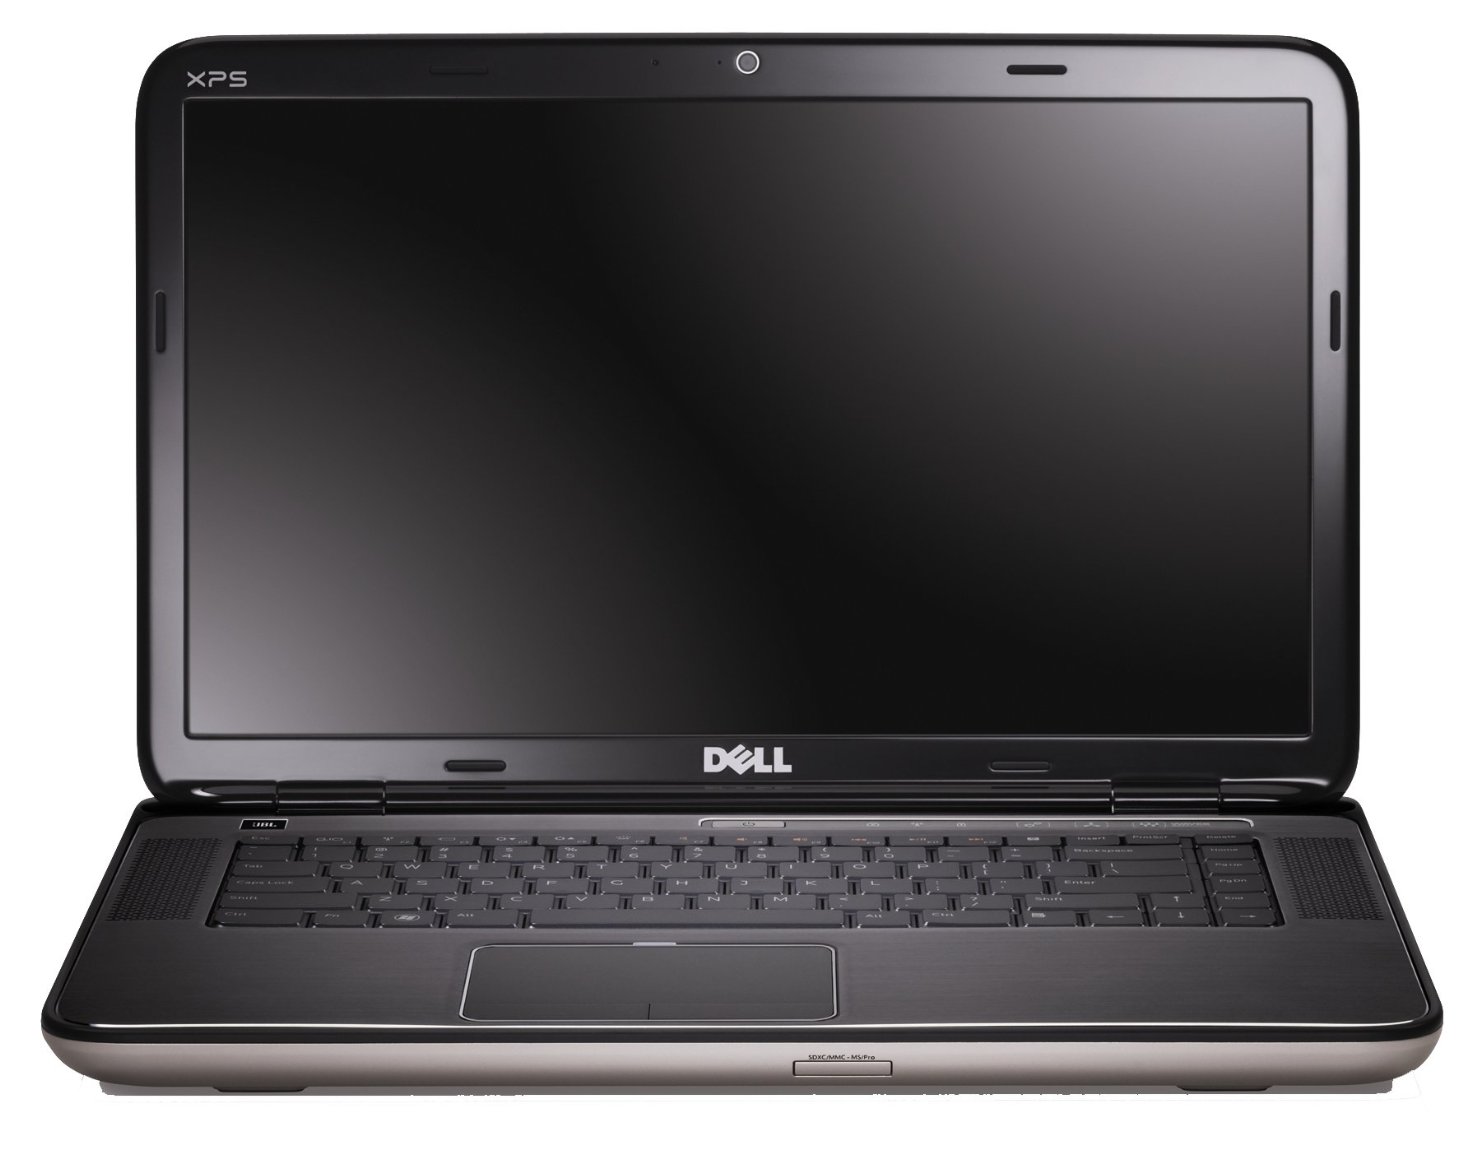   Dell XPS 15 (7590-6657)  1